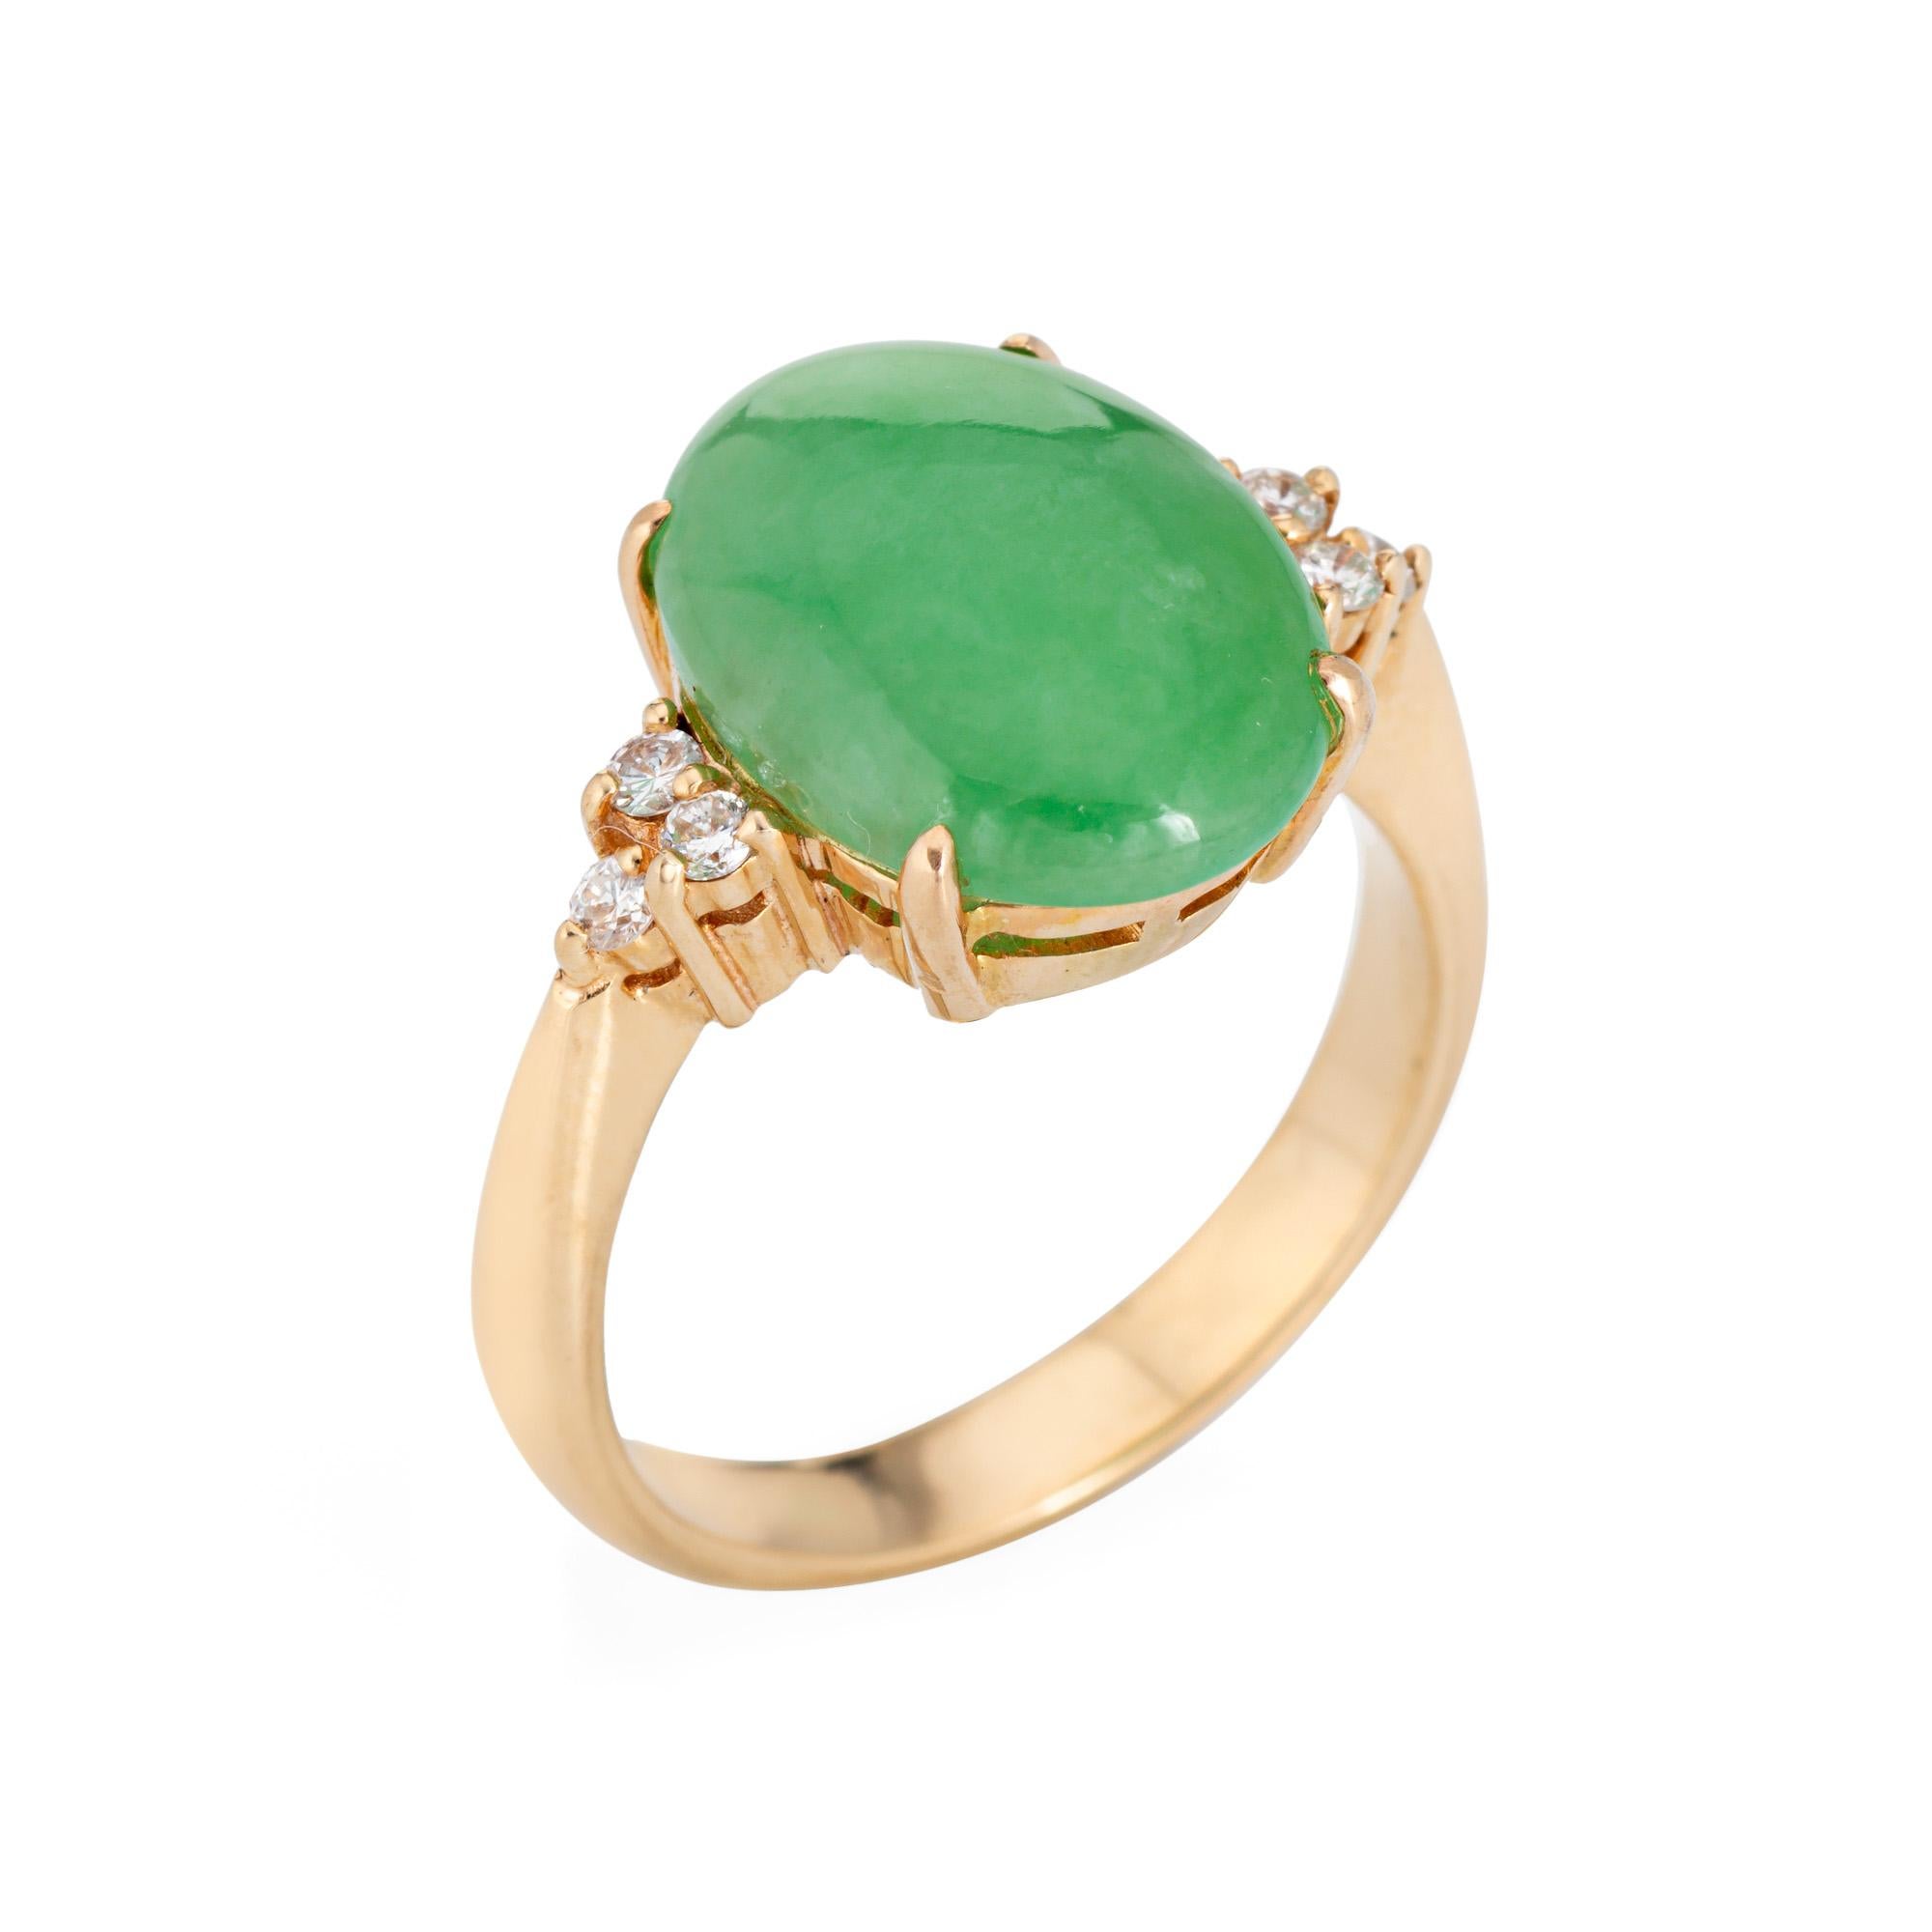 Stylish vintage jade ring (circa 1960s to 1970s) crafted in 14 karat yellow gold. 

Jade measures 14mm x 10mm. The jade is in good condition and free of cracks or chips. Six diamonds total an estimated 0.06 carats (estimated at H-I color and VS2-SI2